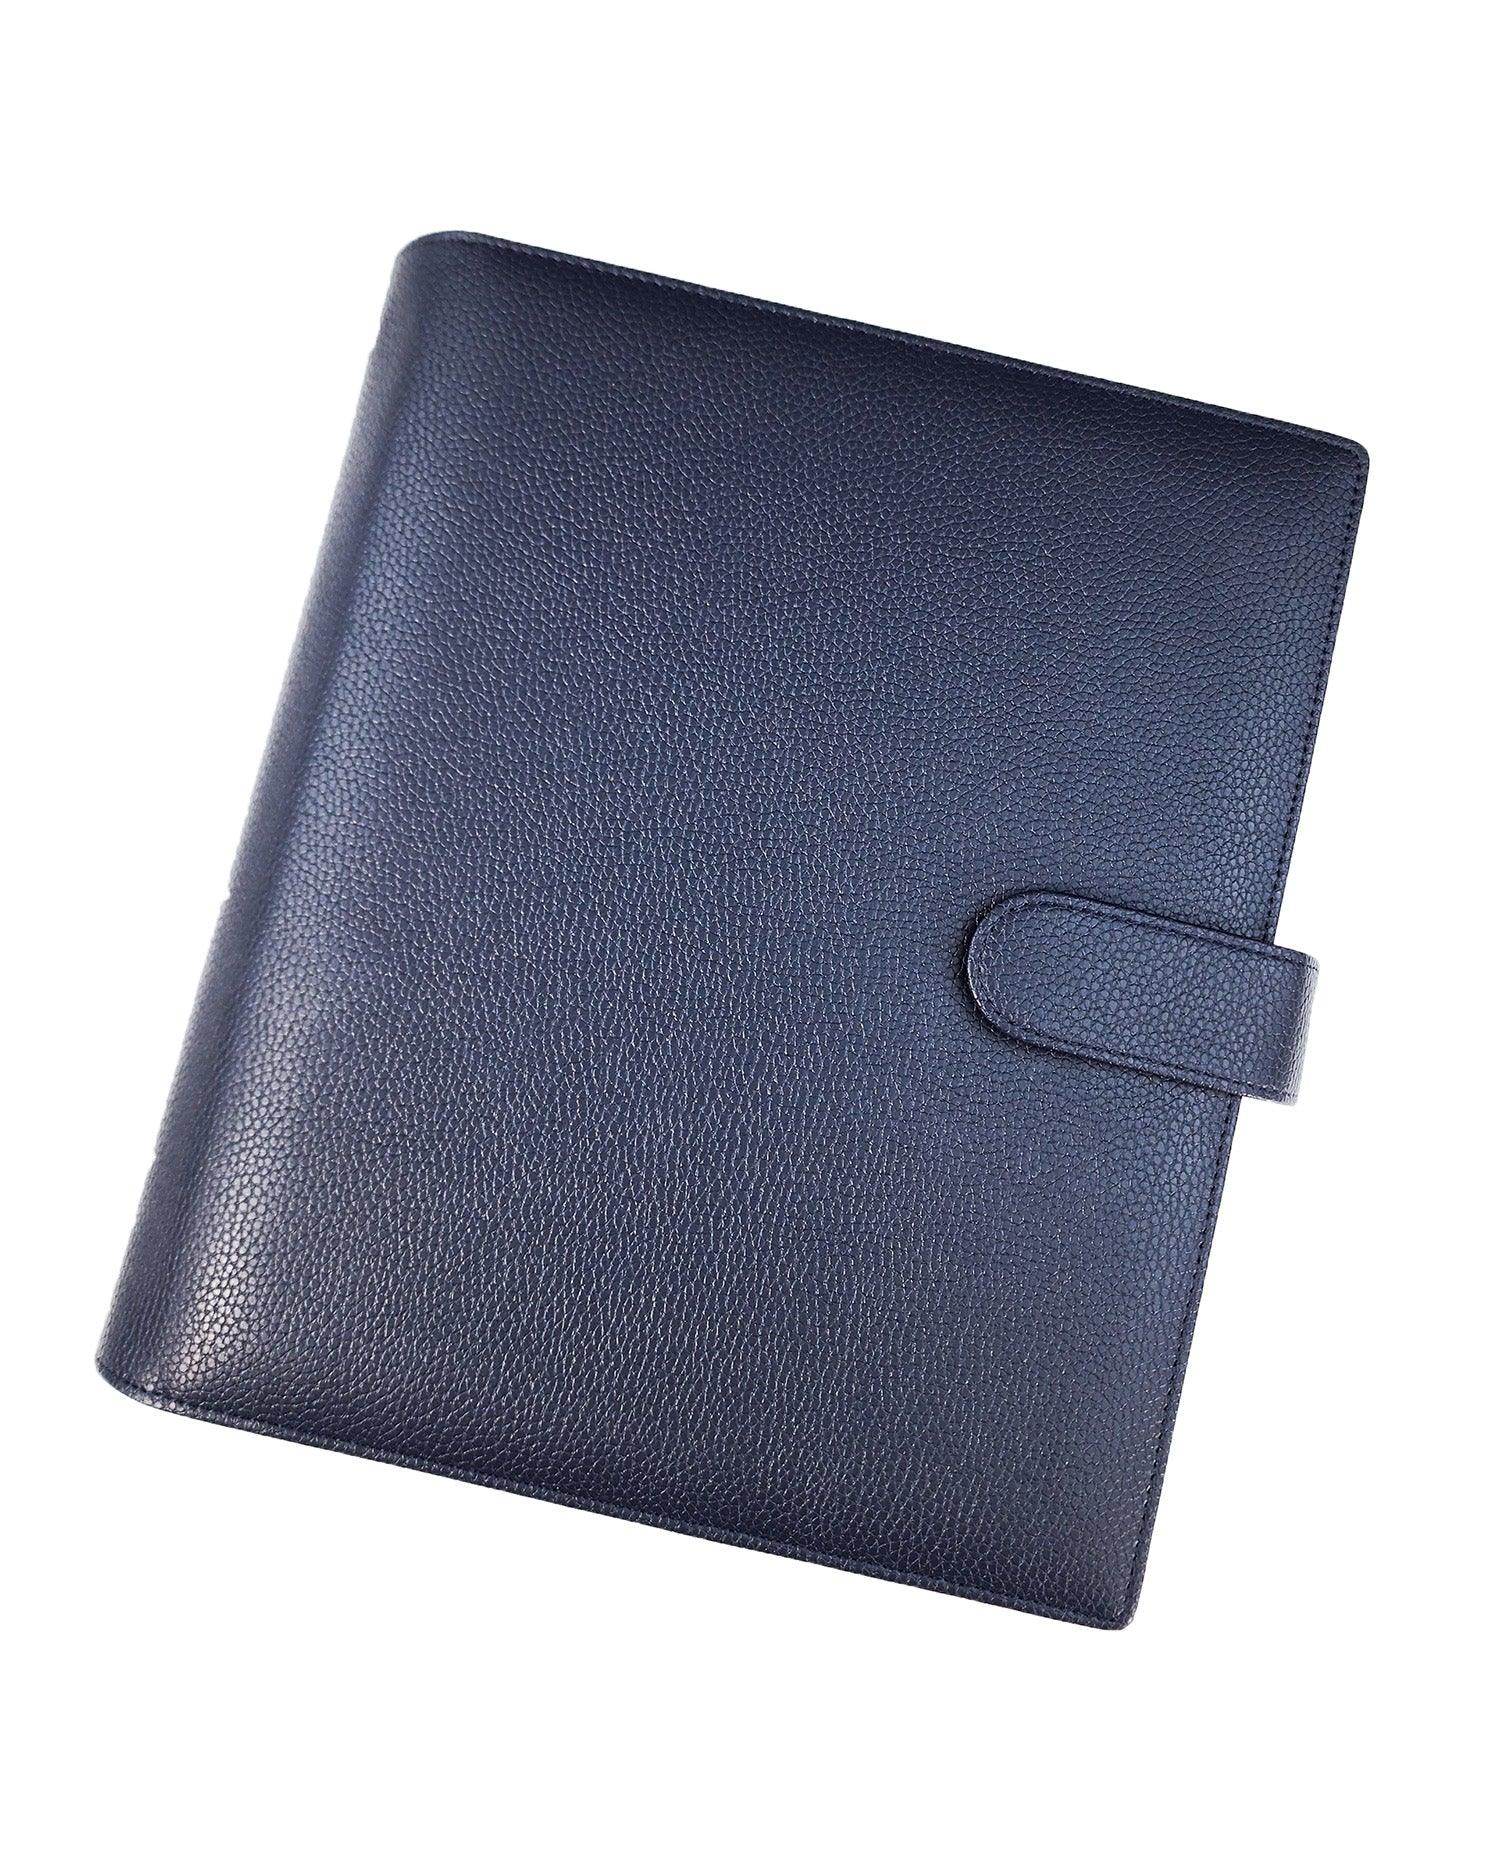 Midnight blue vegan leather wrap around planner cover for discbound planners by Jane's Agenda.